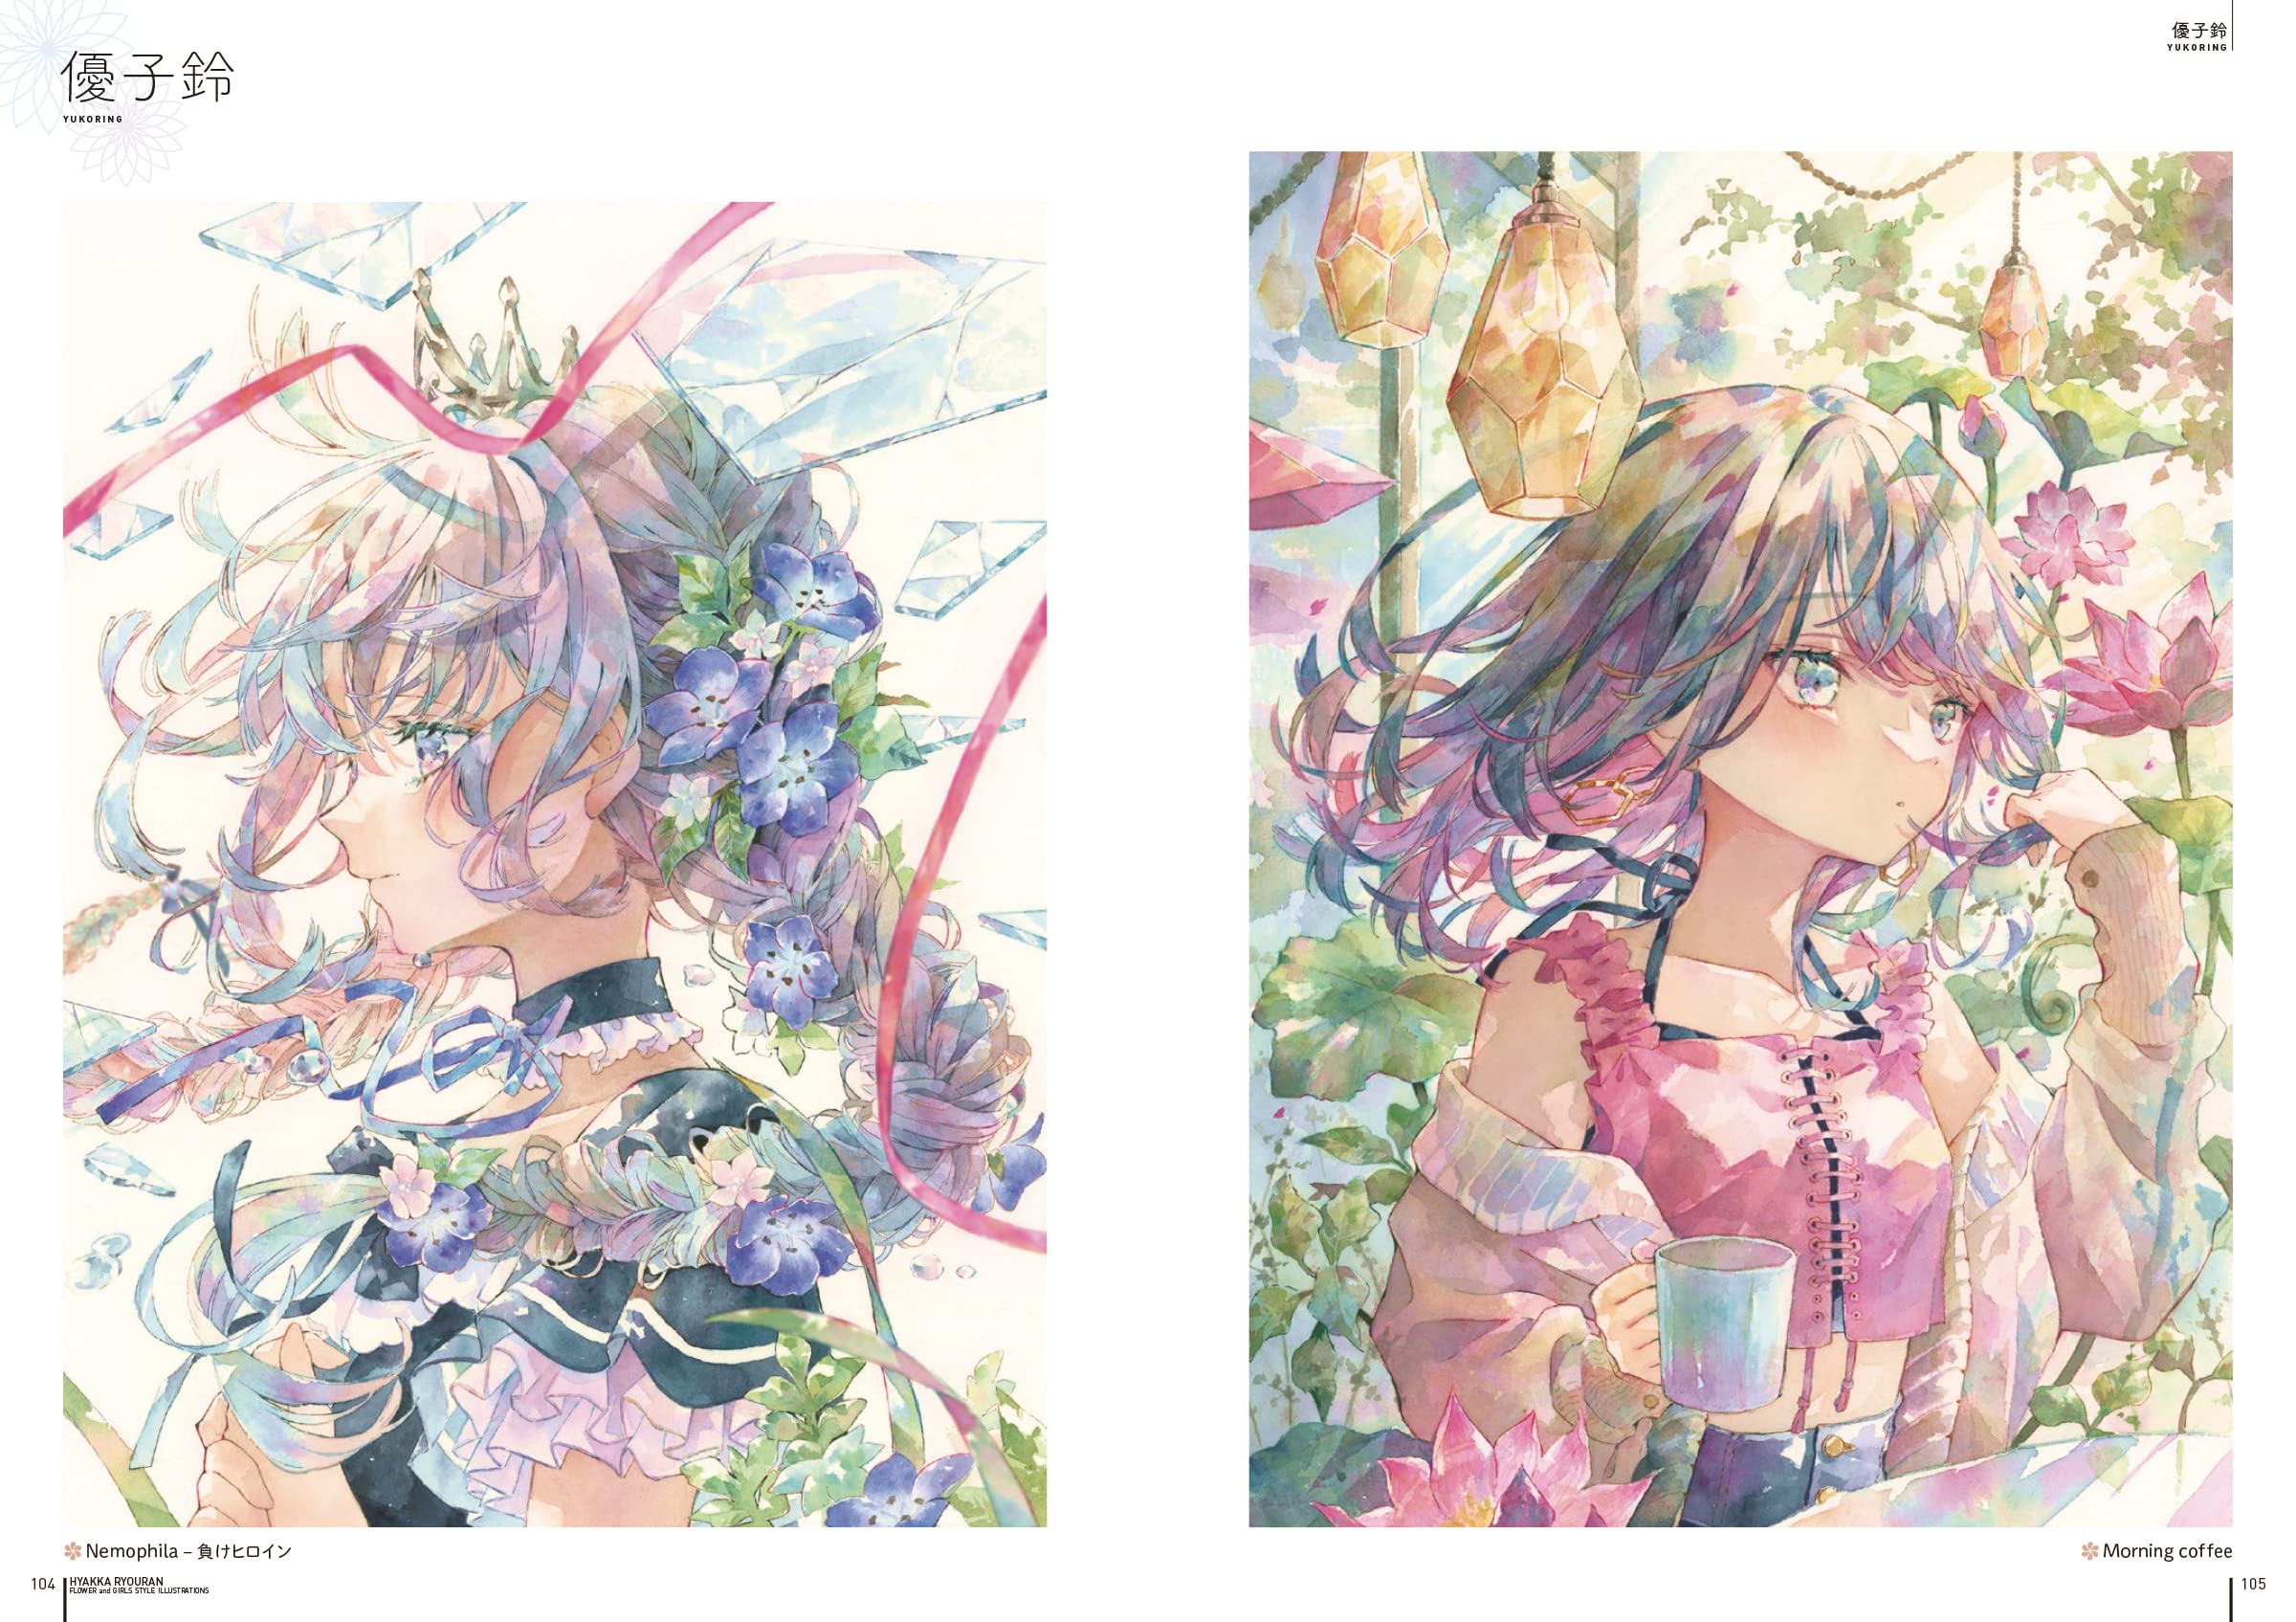 FLOWER and GIRLS STYLE ILLUSTRATIONS 